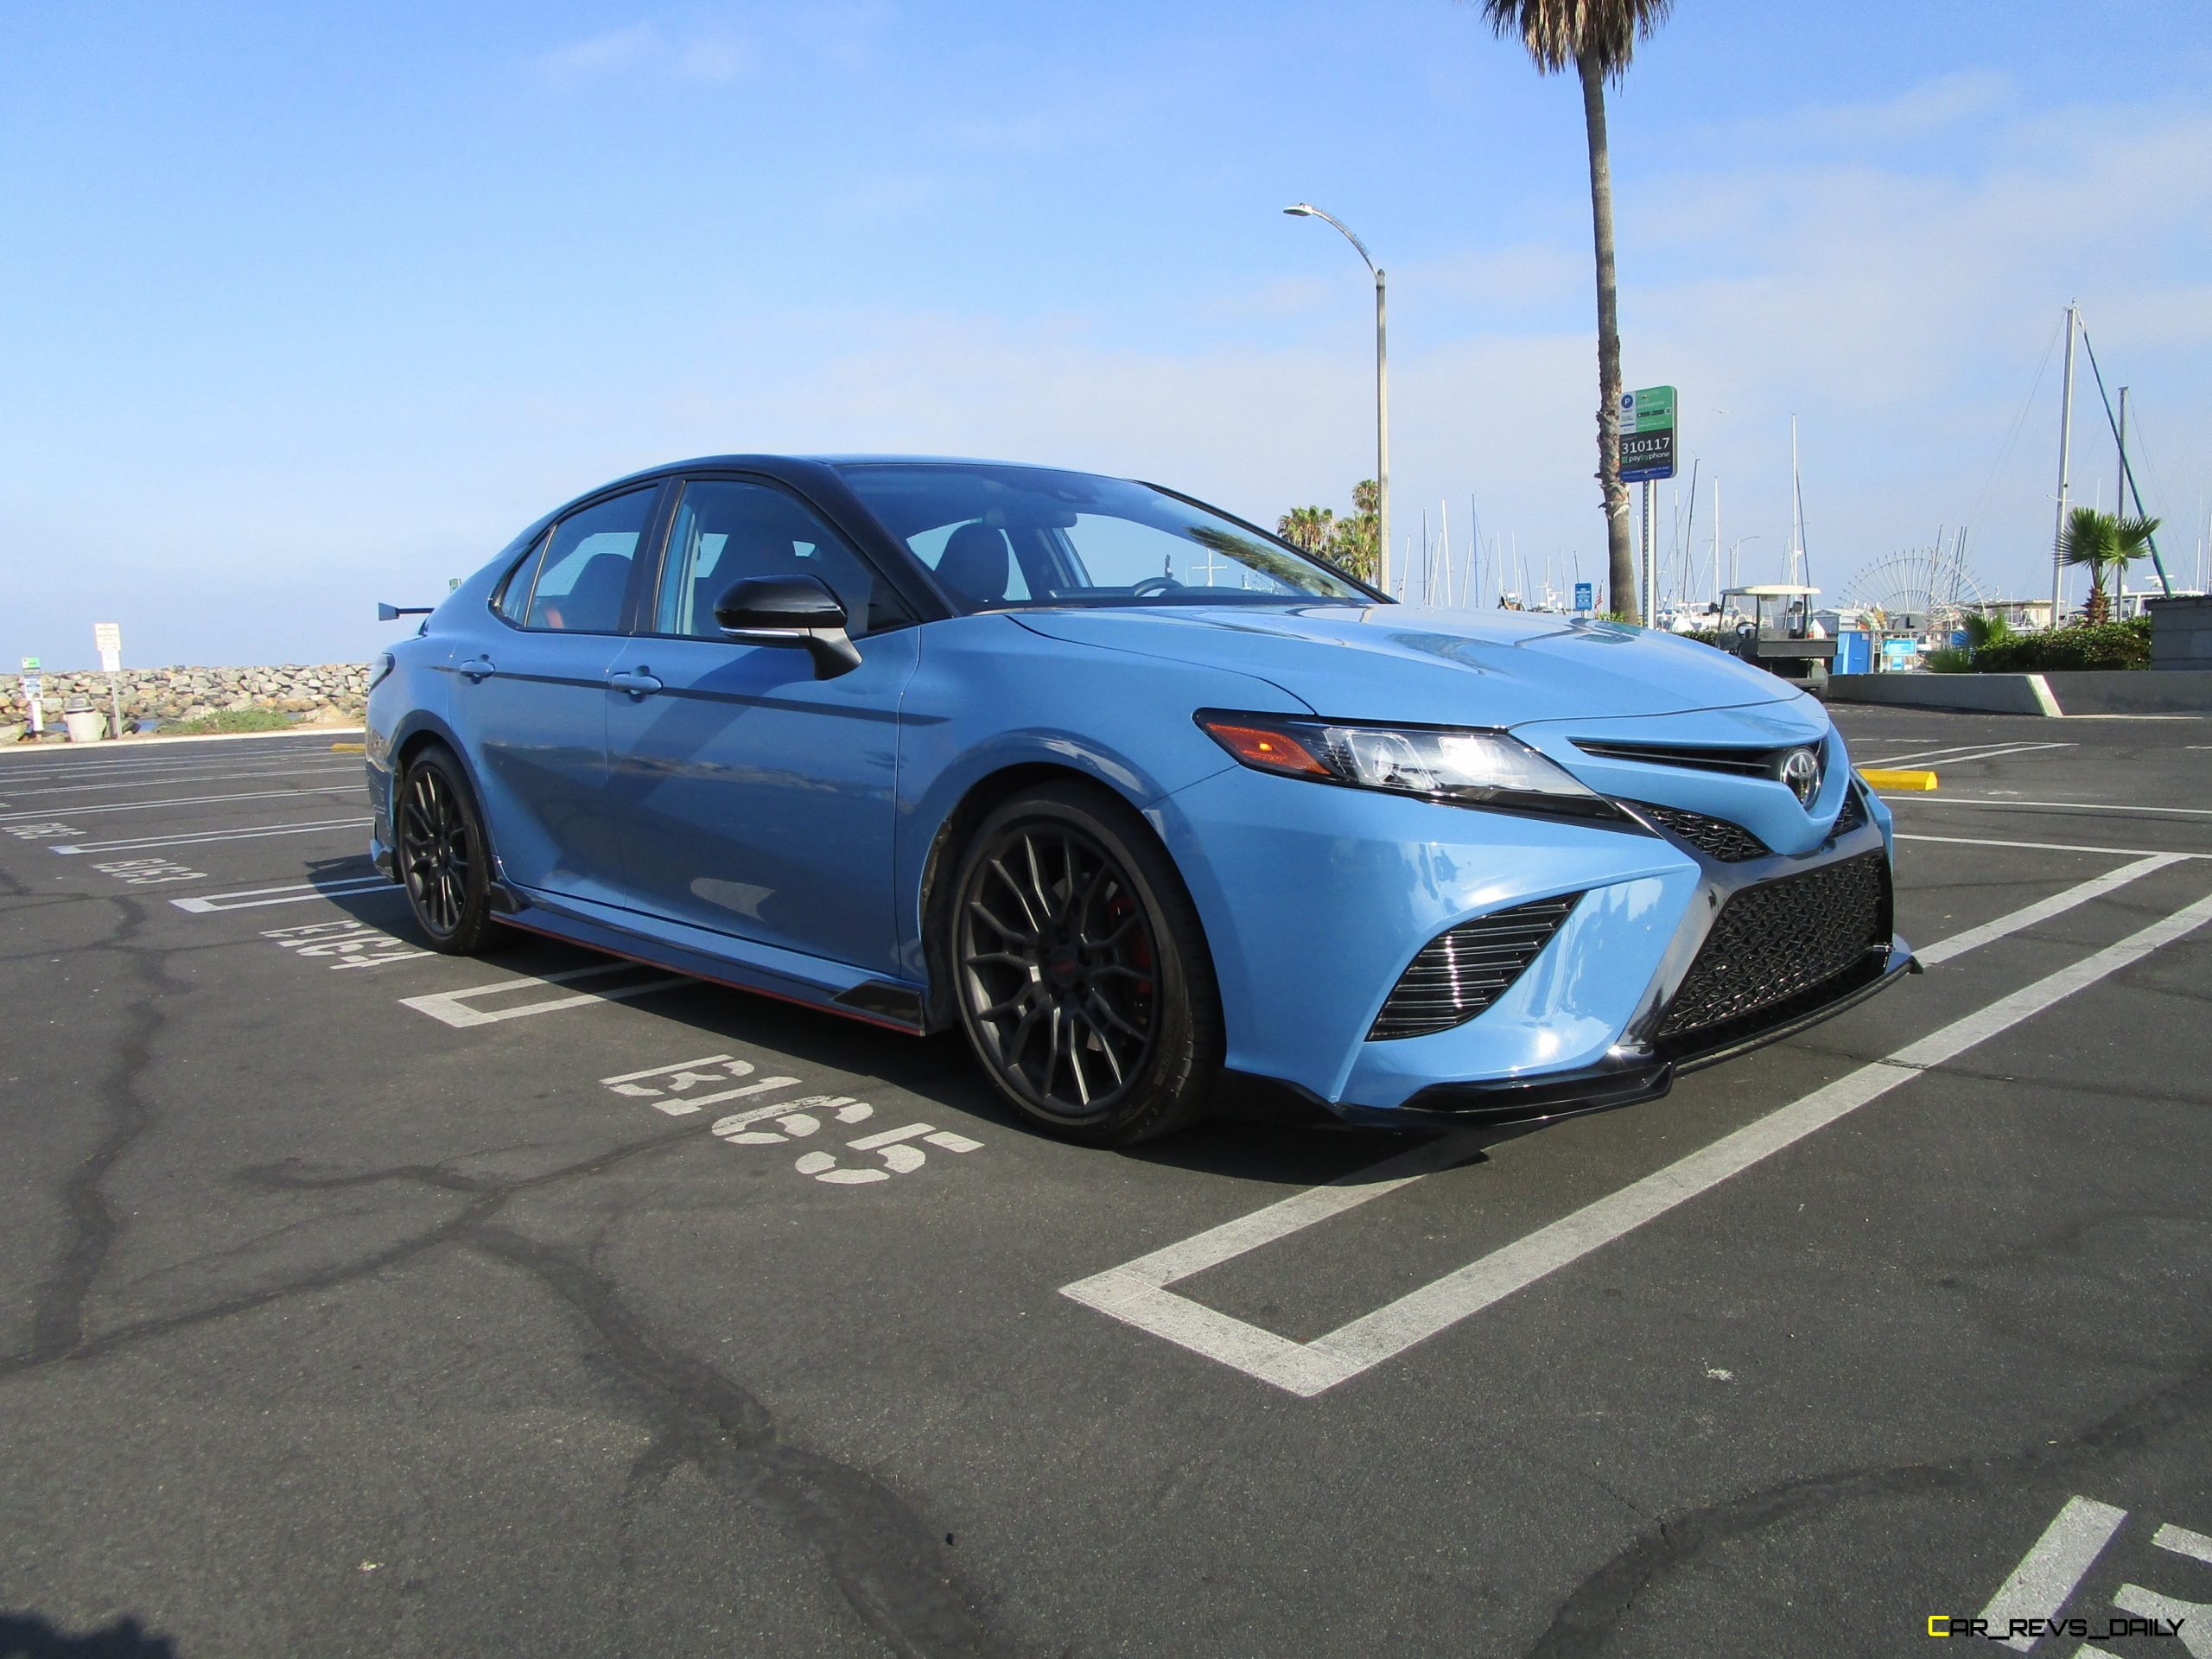 2022 Toyota Camry TRD V6 Review by Ben Lewis » ROAD TEST REVIEWS » Car